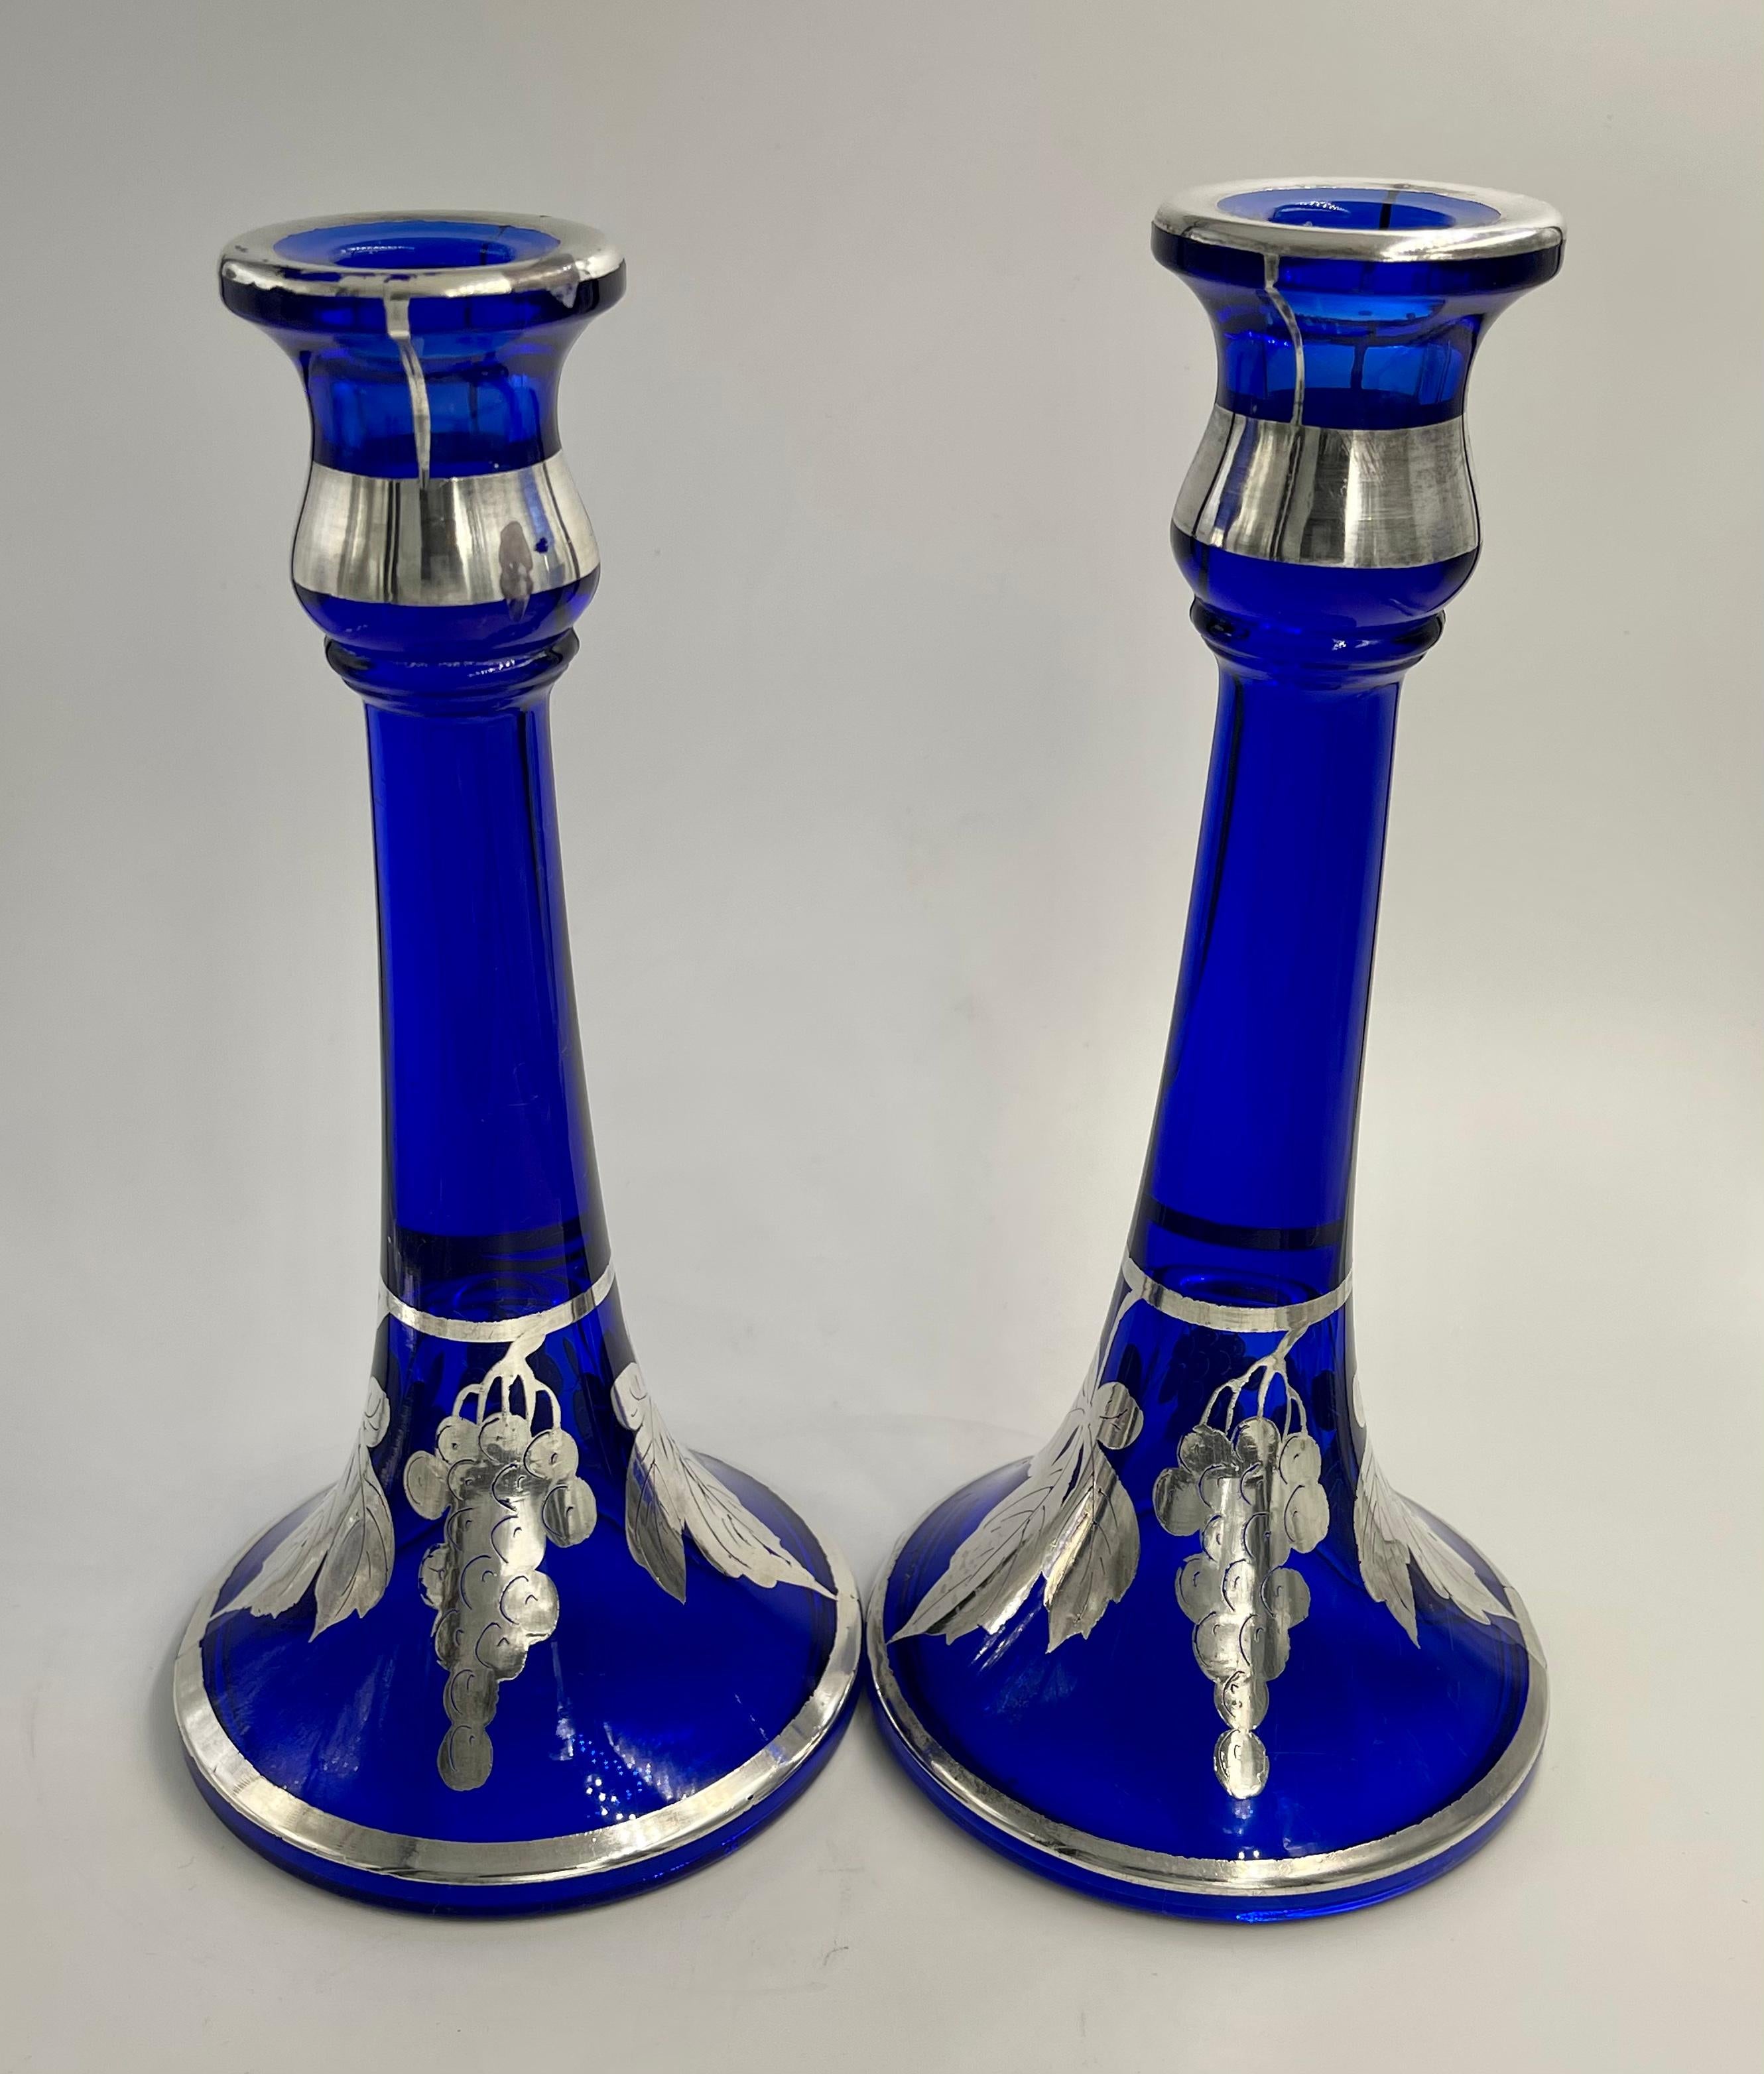 Pair of cobalt blue candlesticks with flash silver overlay ( the thinner version of silver overlay). Gorgeous blue candle holders with 4 lines going from rim to bottom. The bottom flares and is decorated with 2 vines of grapes and 2 leaves on each.